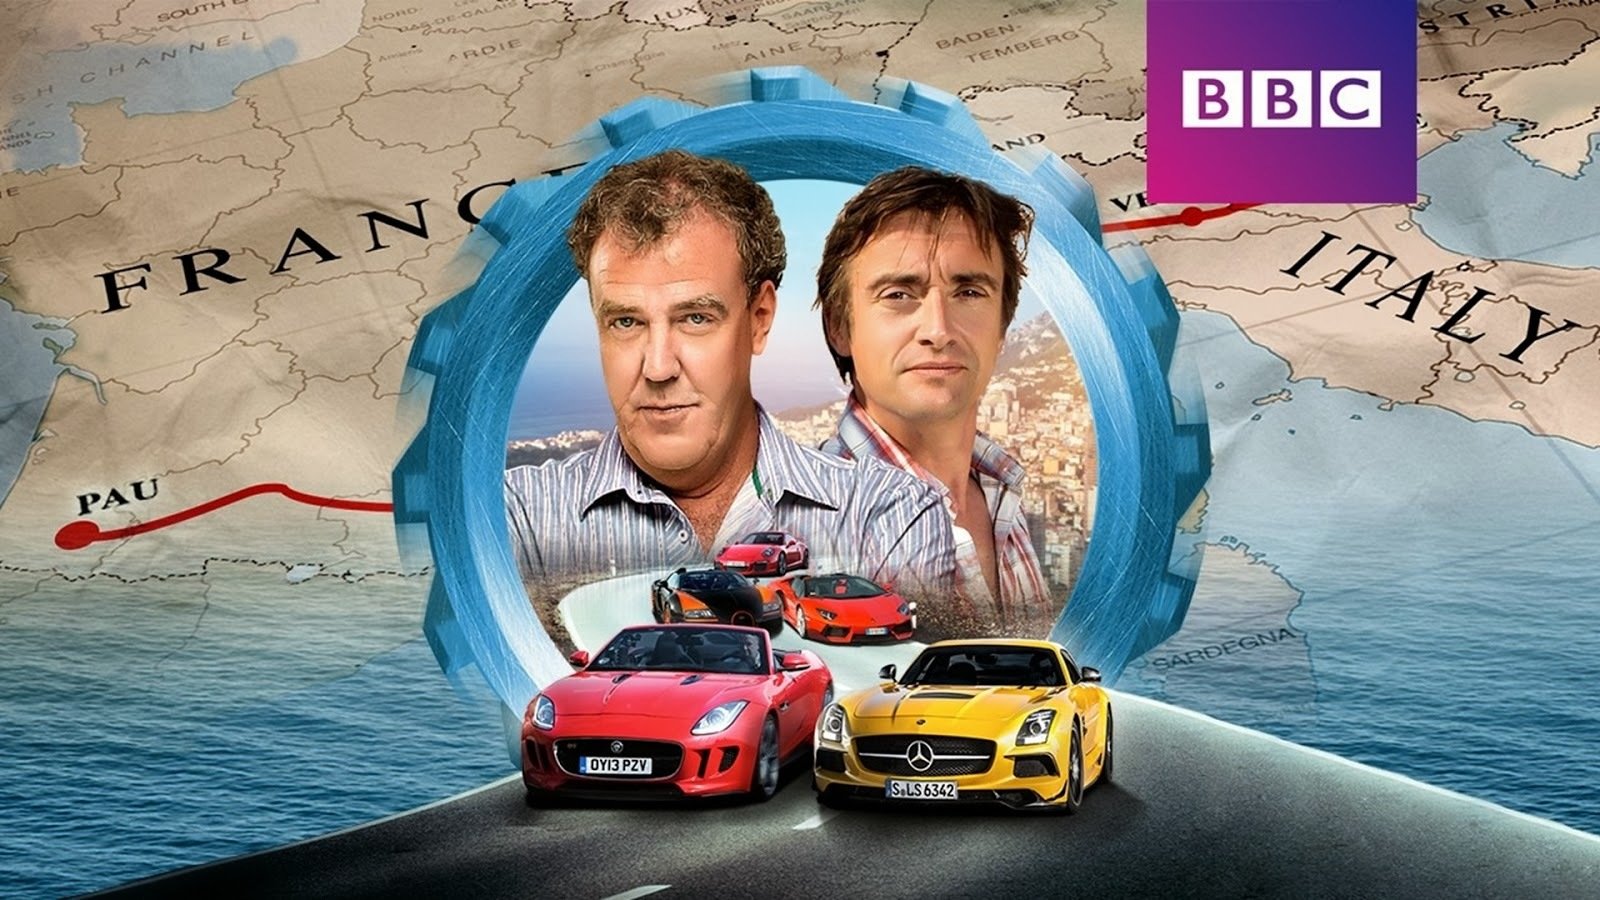 Top Gear - The Perfect Road Trip DVD